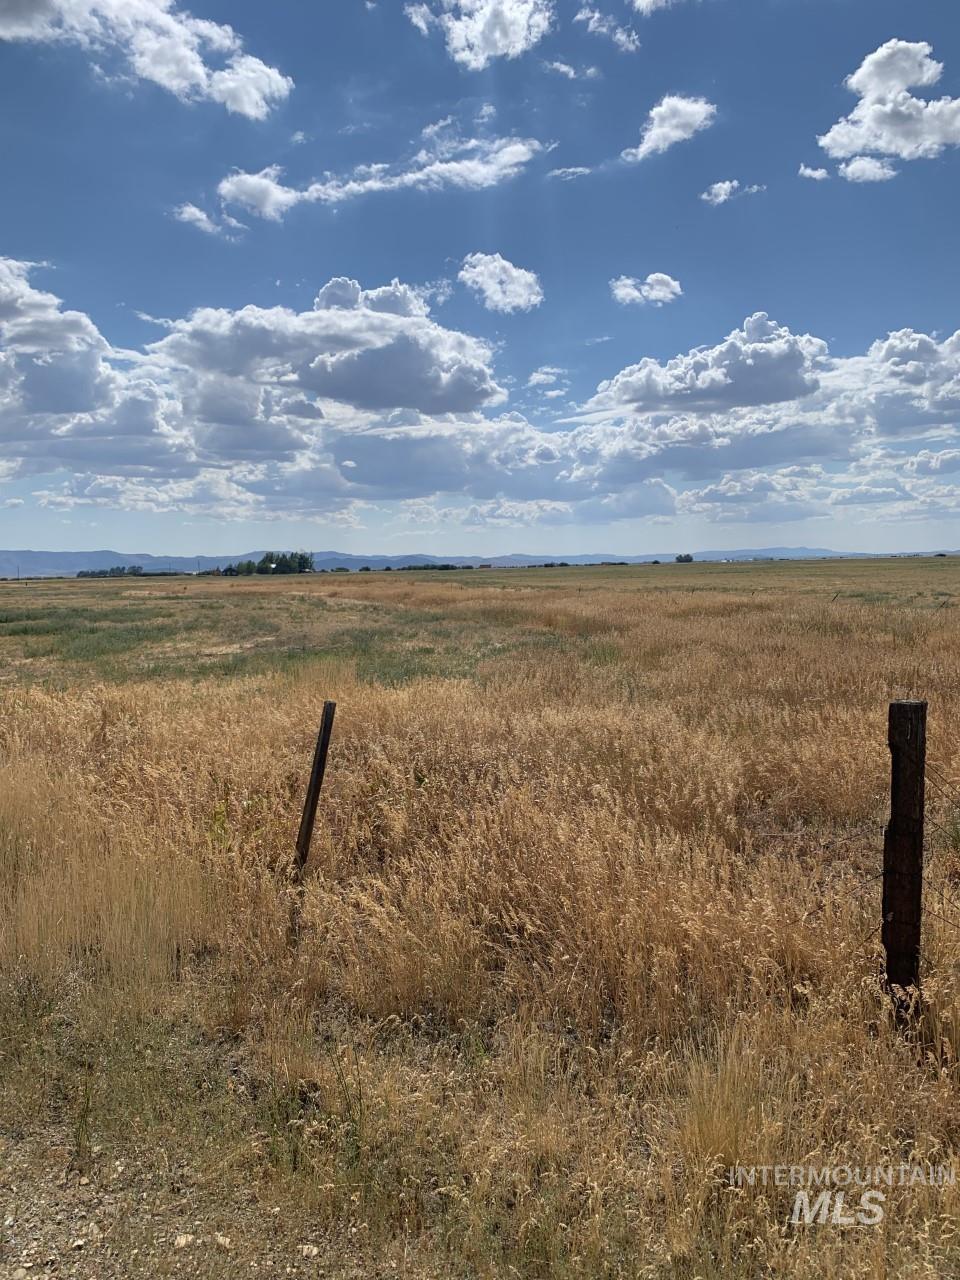 TBD - P2 Soldier Road, Fairfield, Idaho 83327, Land For Sale, Price $65,000,MLS 98855706